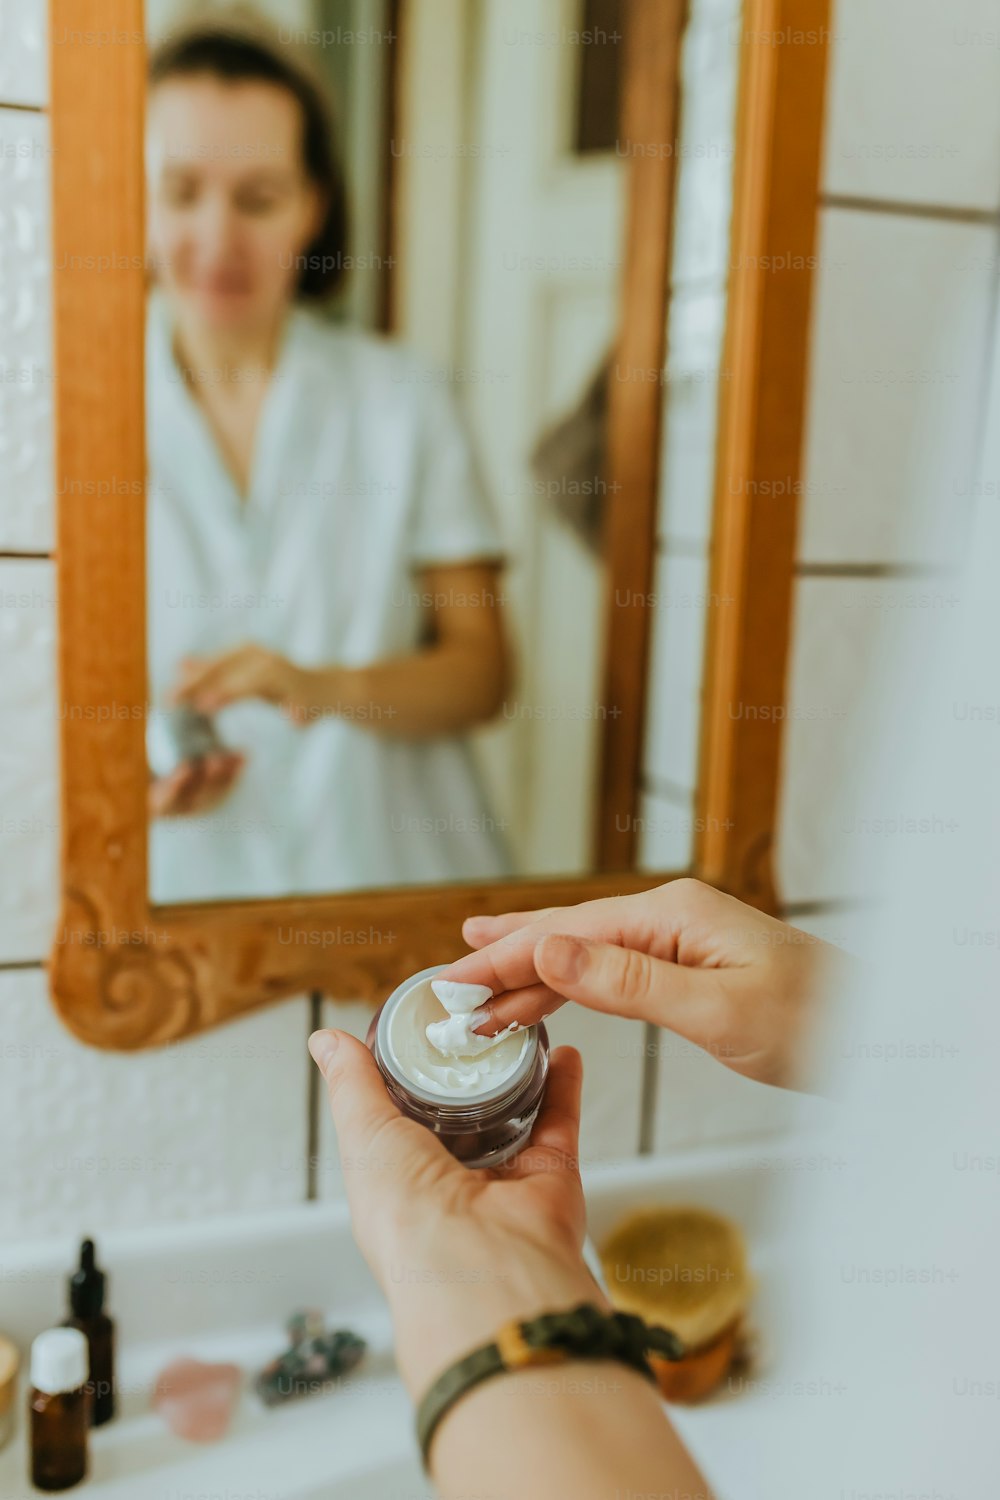 a woman is holding a jar of cream in front of a mirror